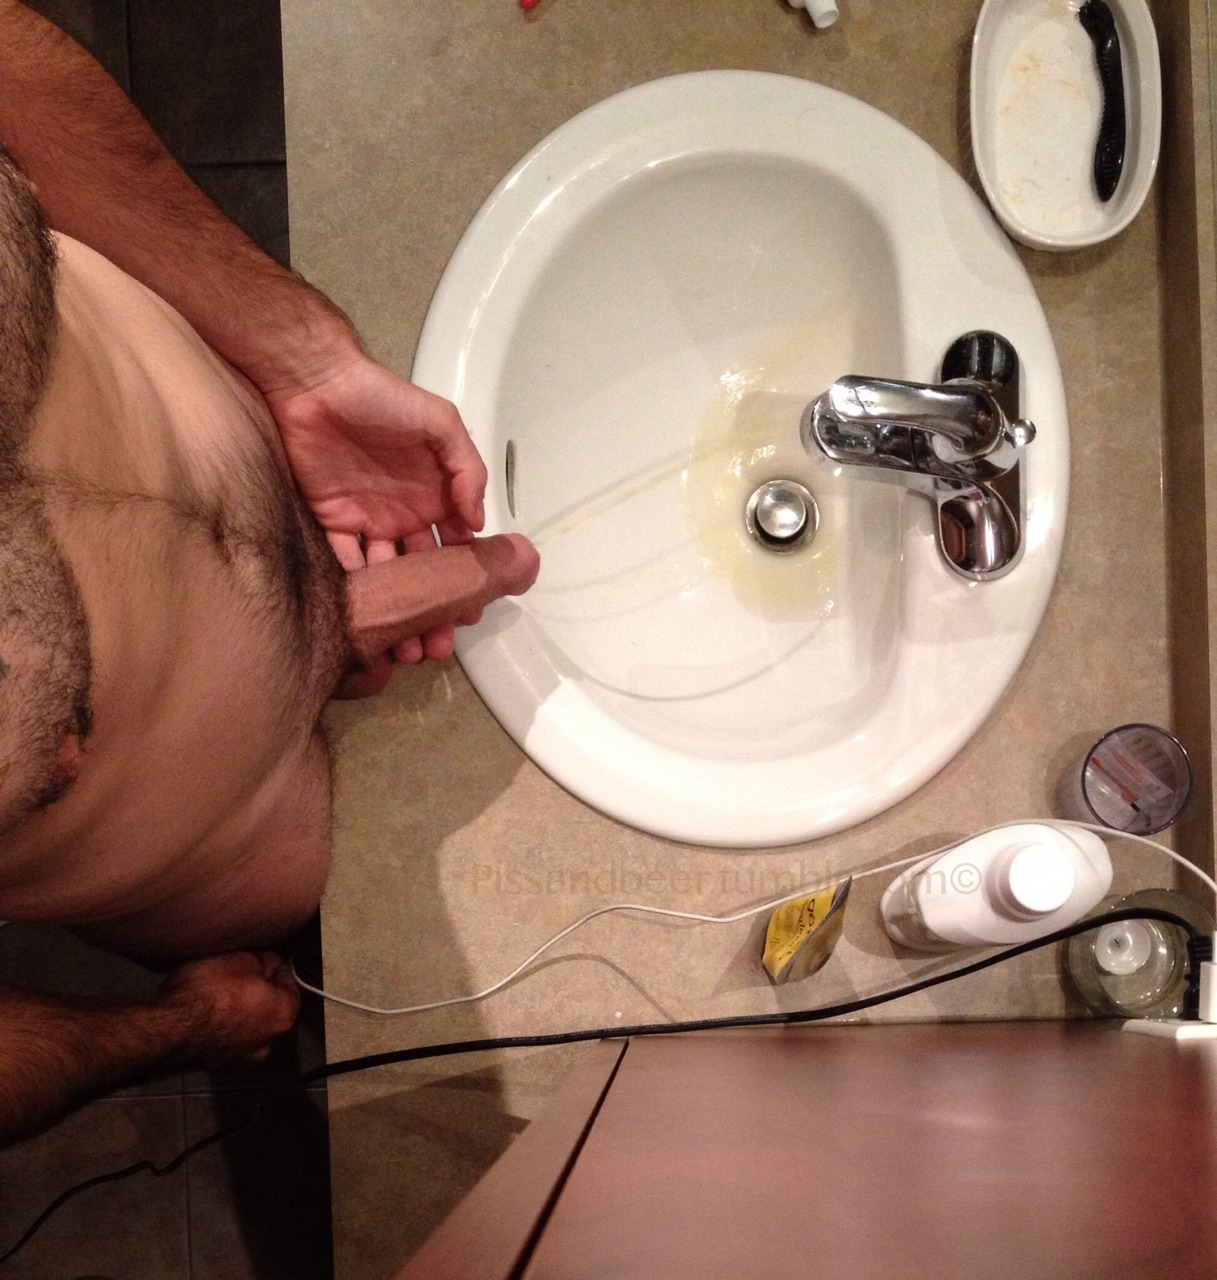 pissandbeer:  It’s so easier to piss in the sink! 